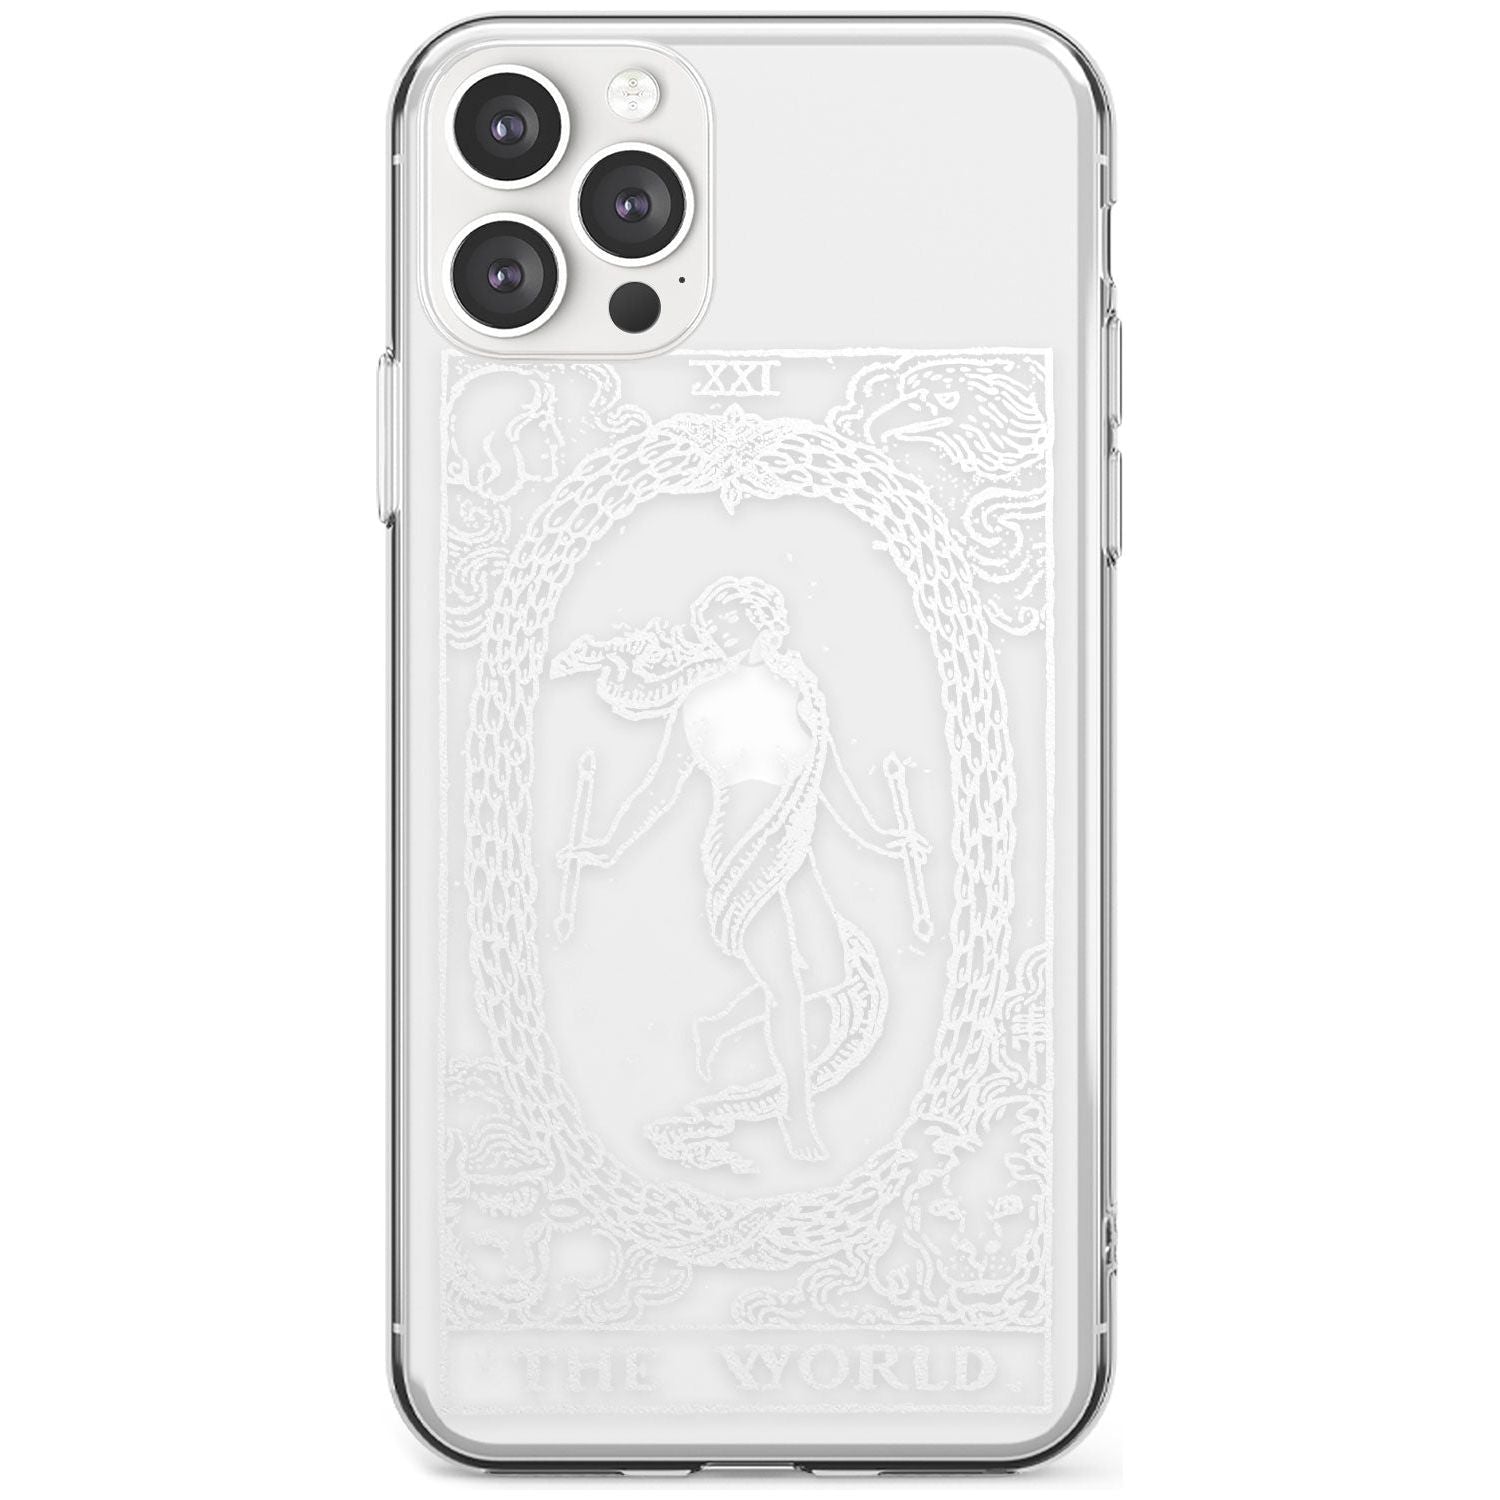 The World Tarot Card - White Transparent Black Impact Phone Case for iPhone 11 Pro Max